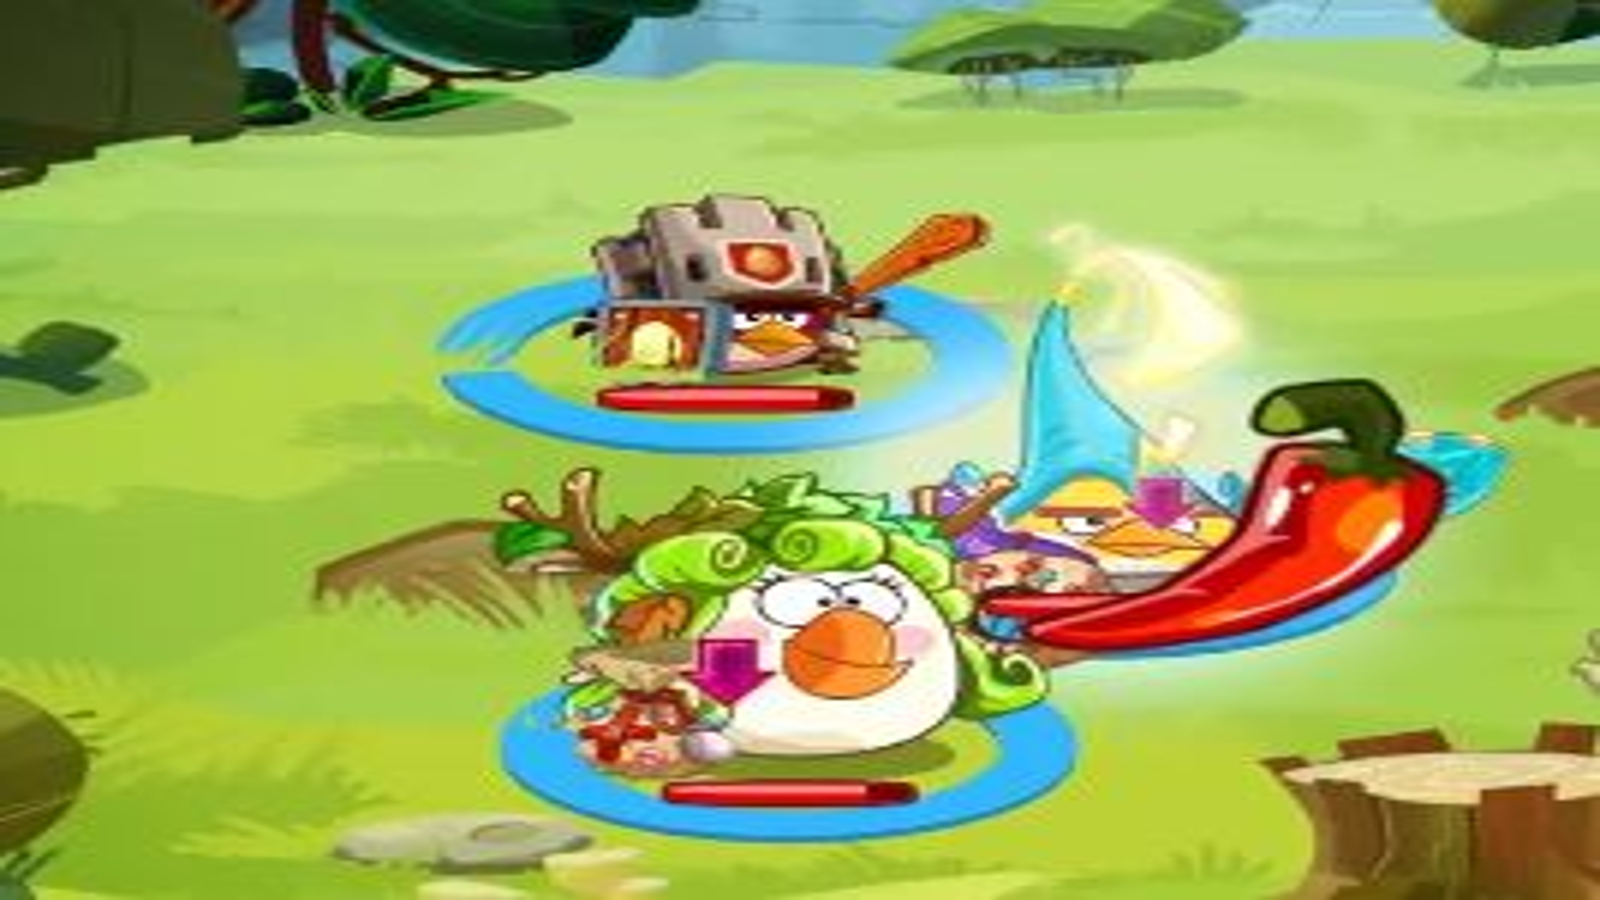 Angry Birds Epic/Glitches, Angry Birds Wiki